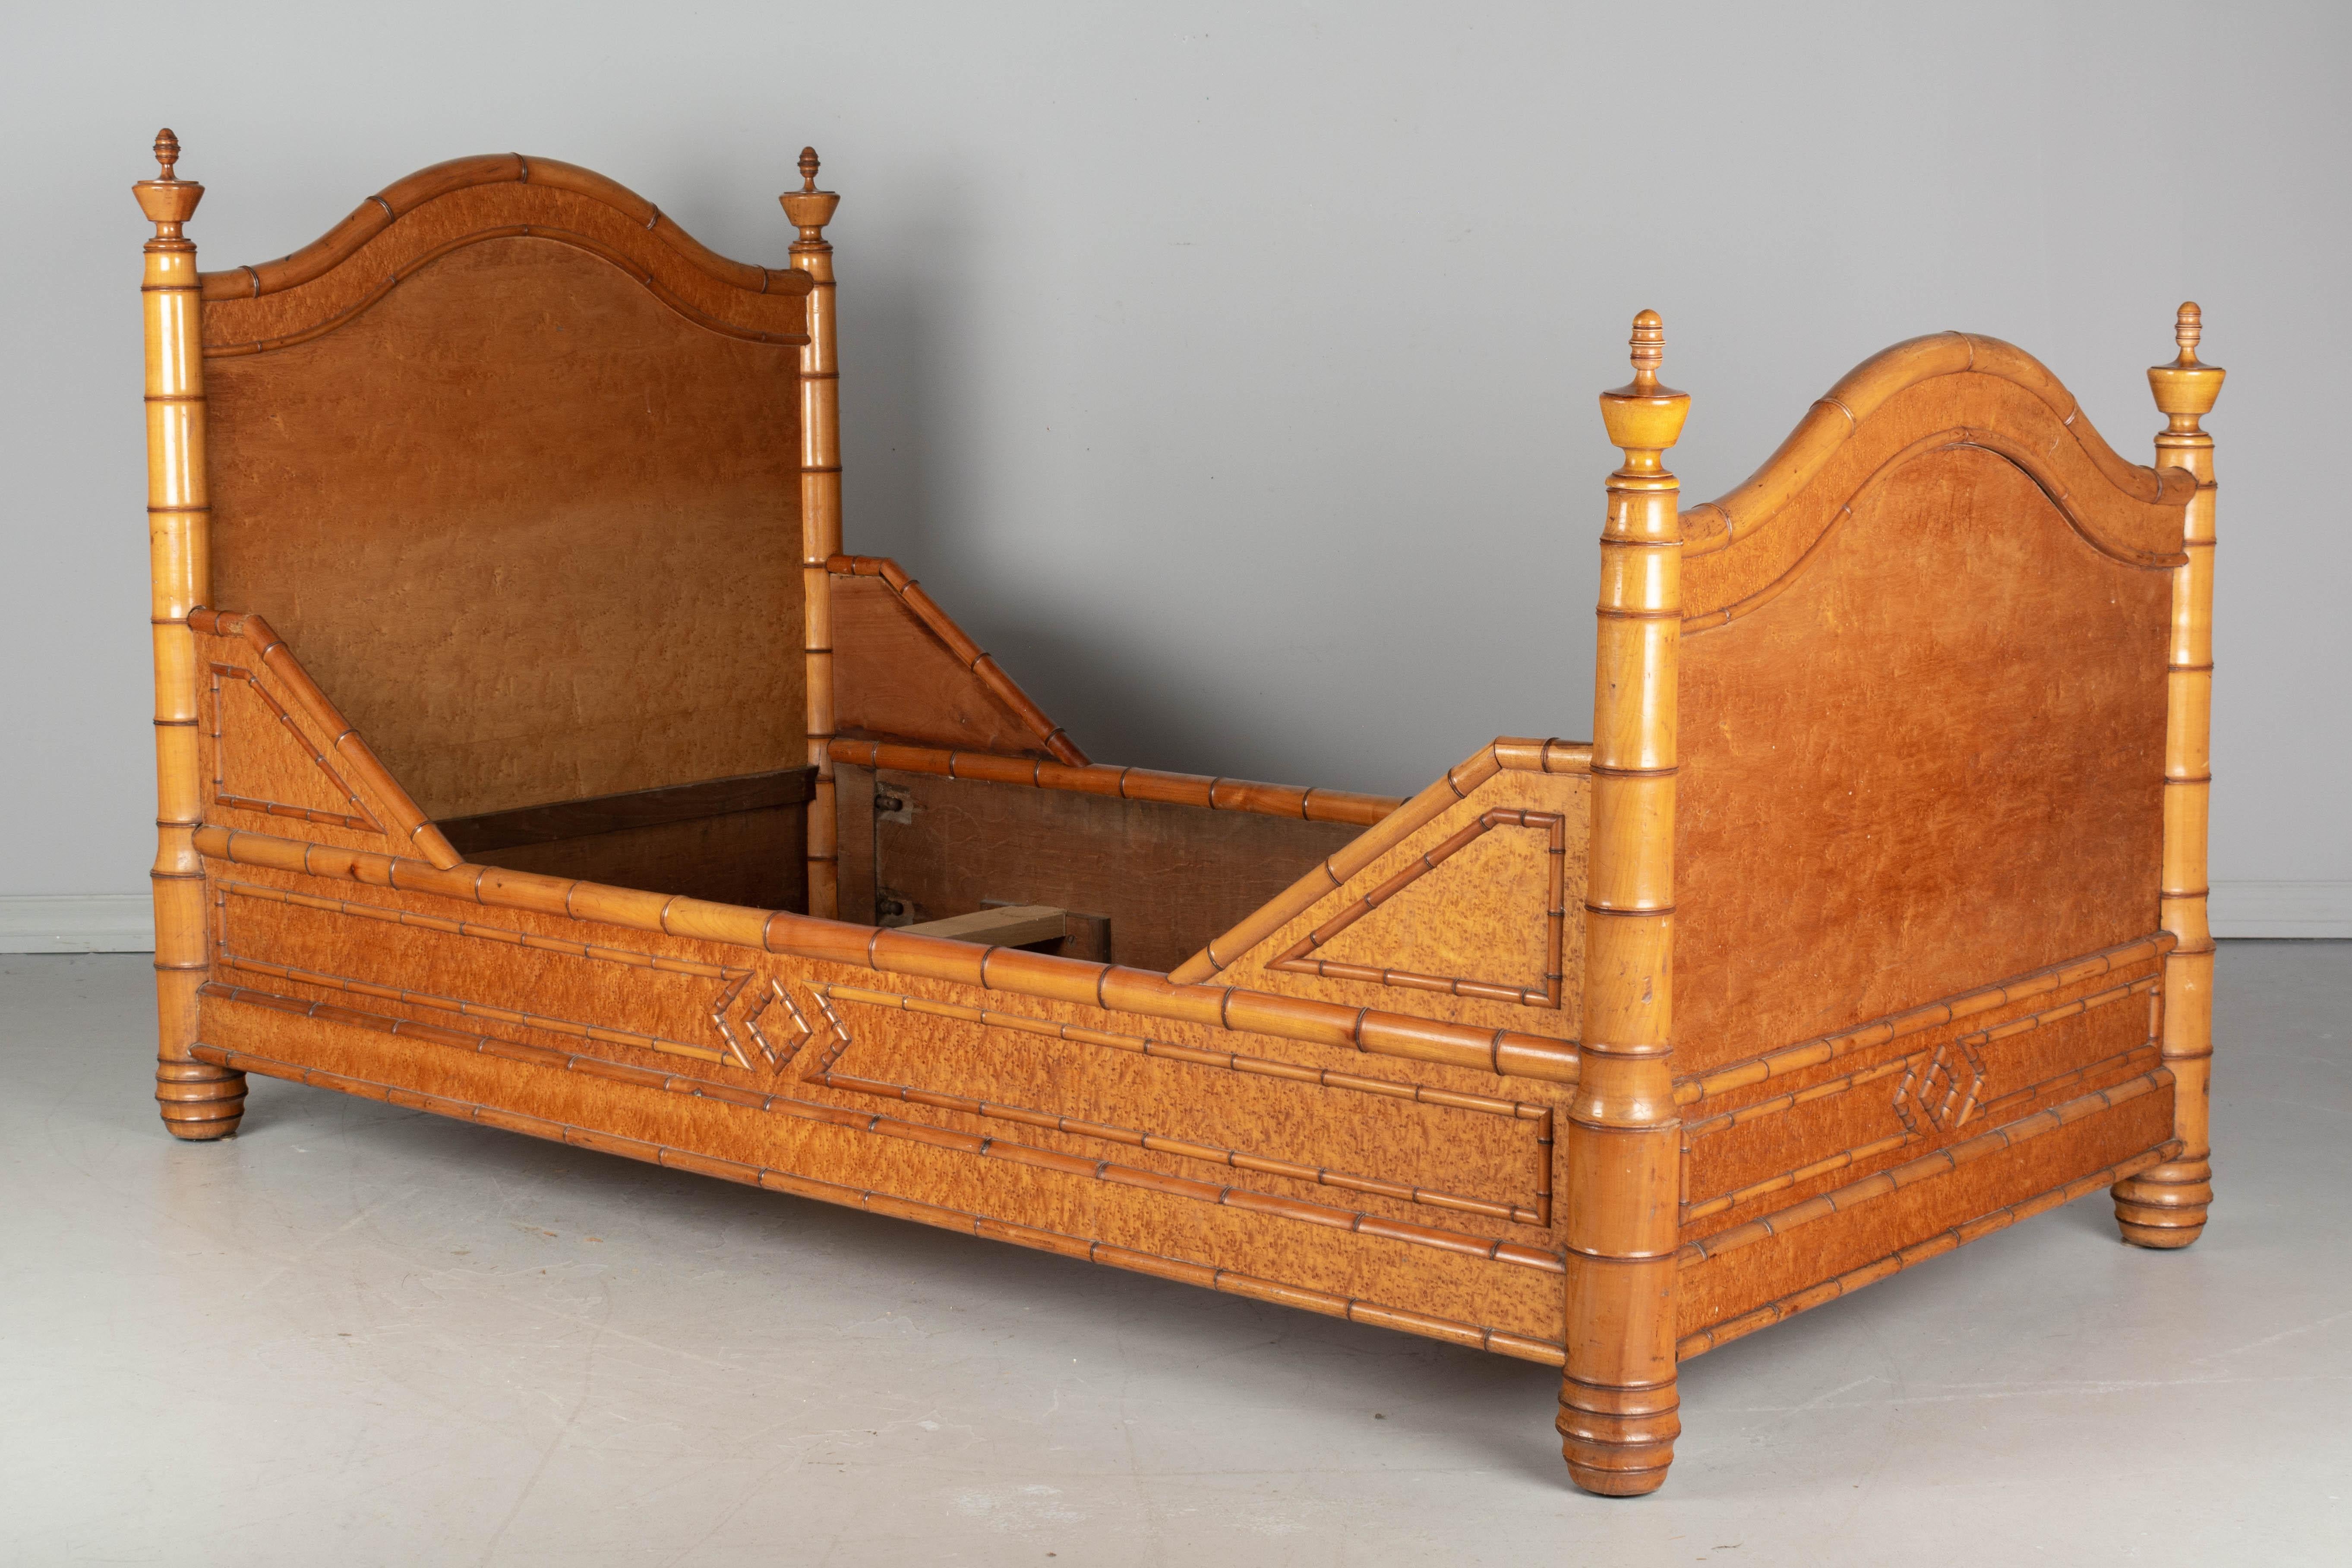 A good quality 19th century French faux bamboo bed, handcrafted of pitch pine with carved cherrywood decorative trim. Nice diamond pattern details. Two of the turned final bedposts are replaced. Good sturdy construction. In four parts and easy to